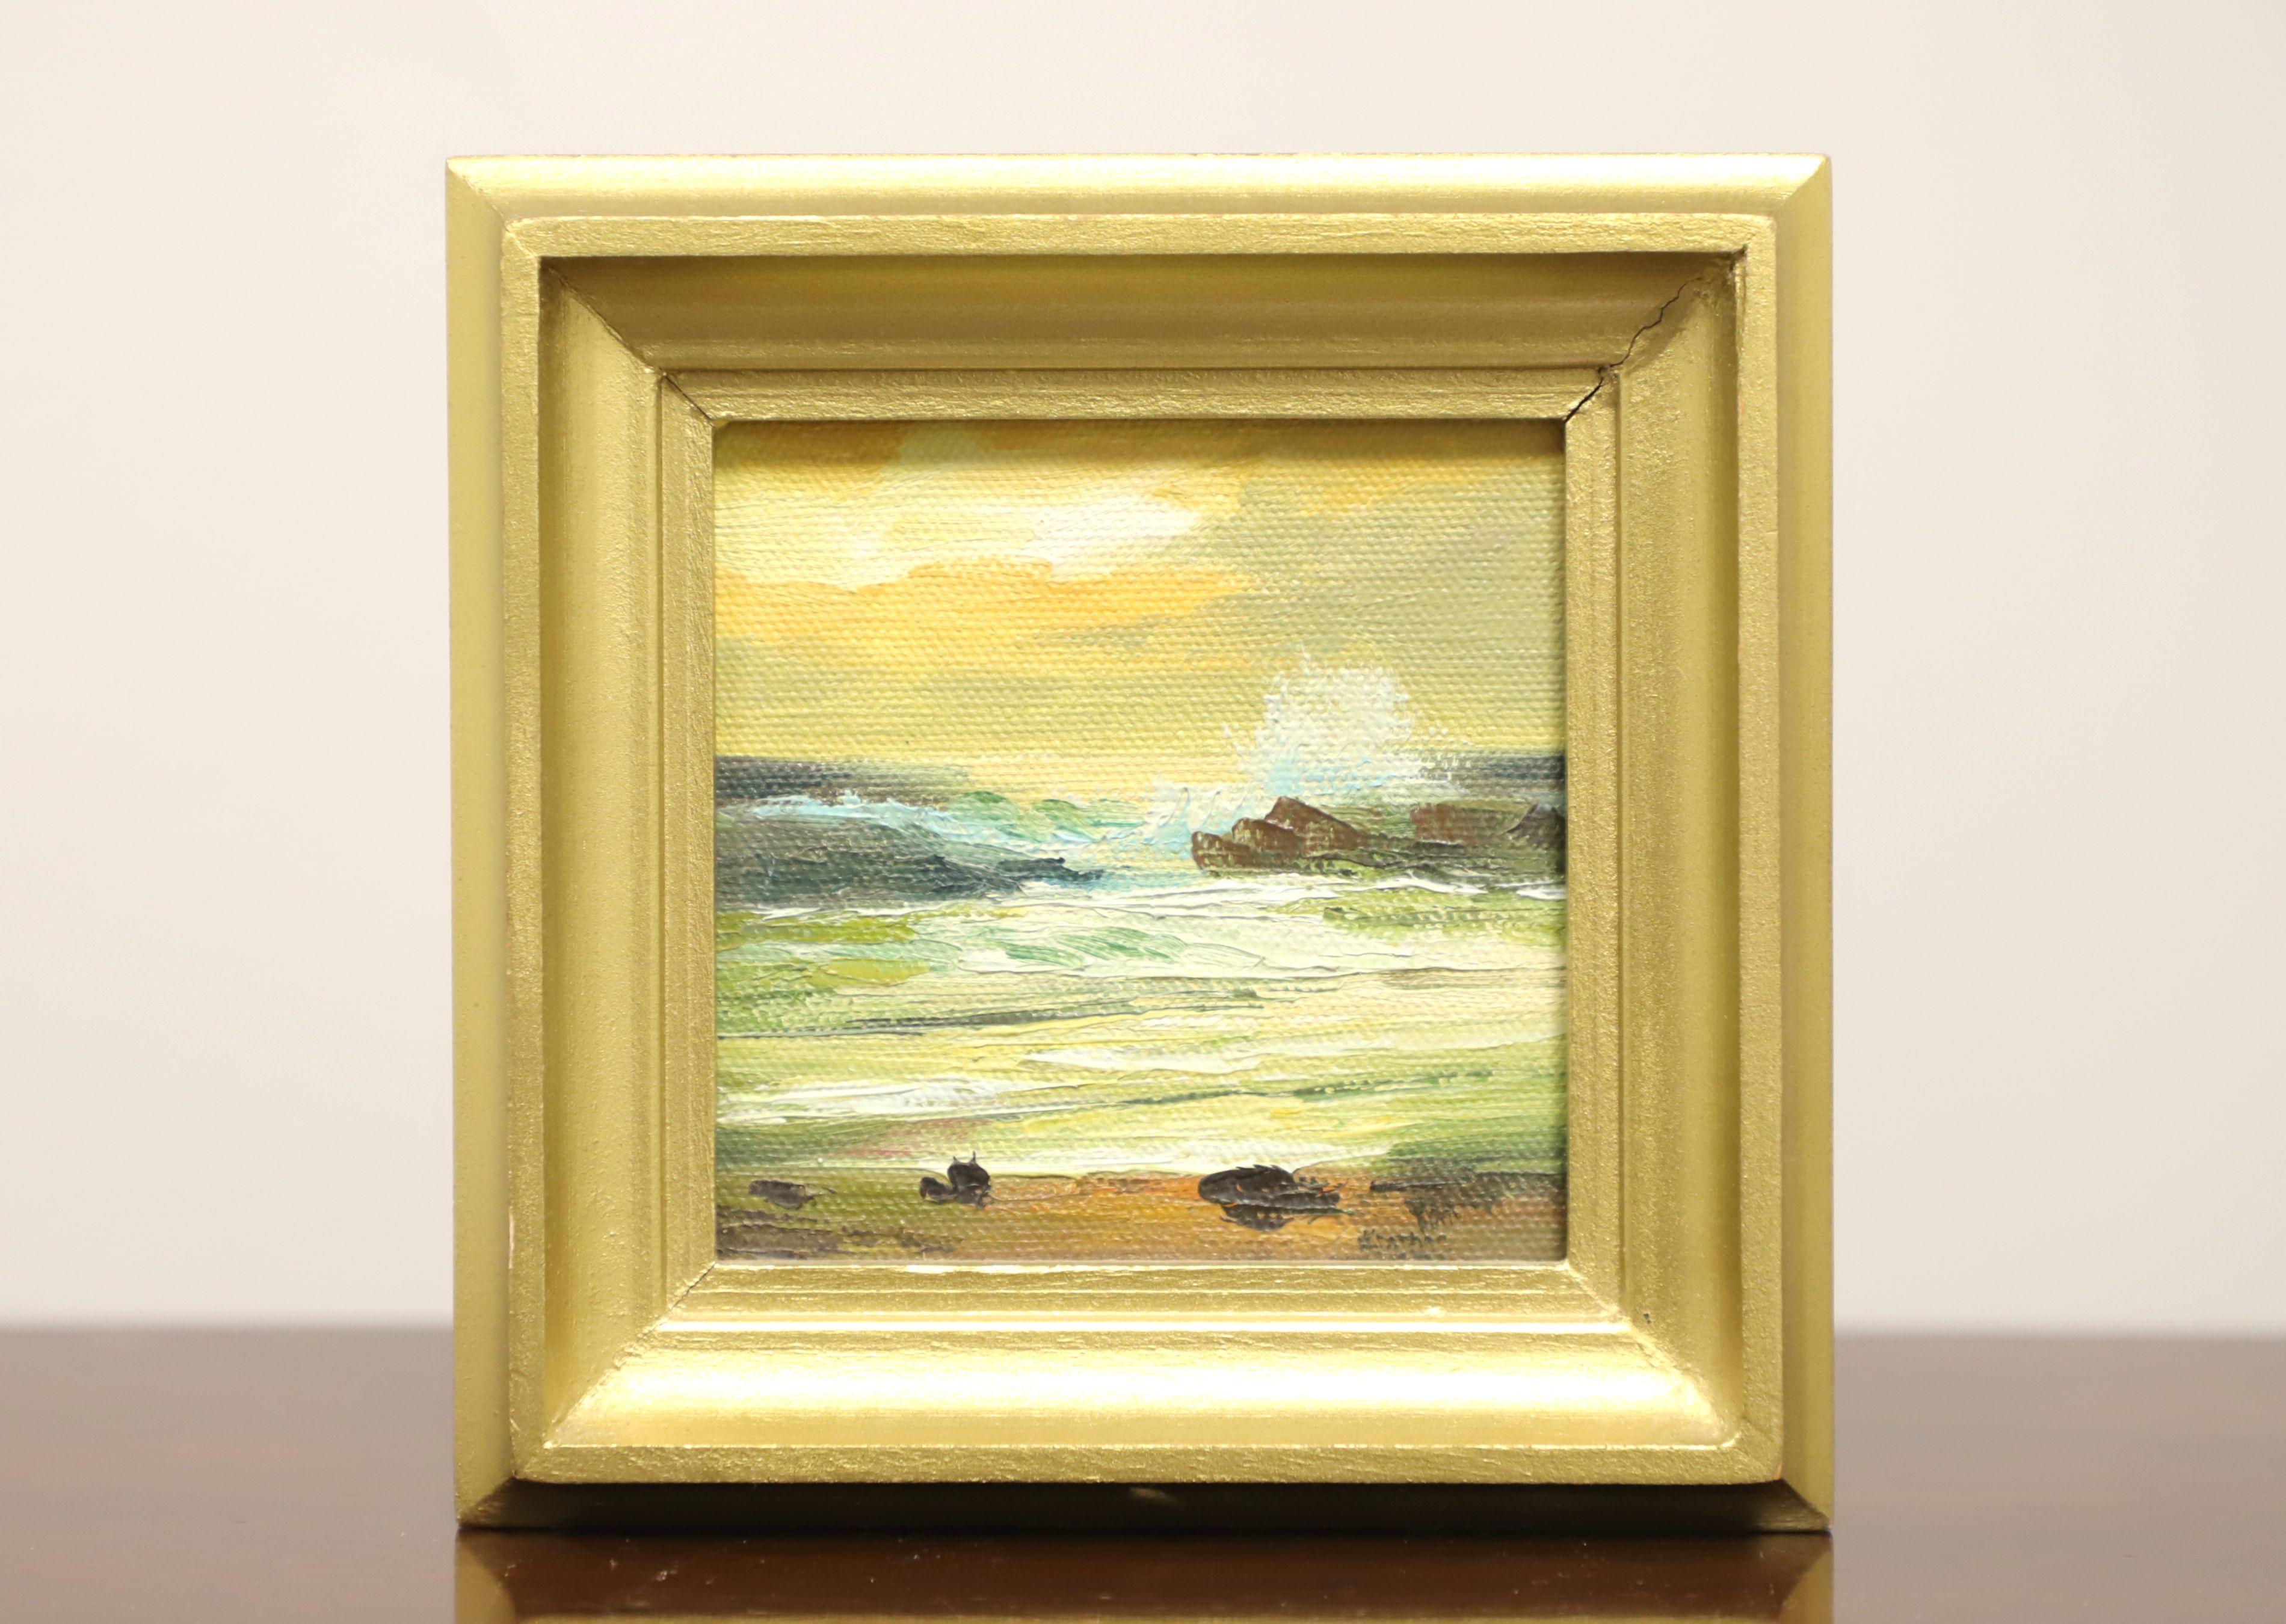 A trio of original oil paintings on canvas, from the 20th century. Untitled, (Landscapes). Unsigned, artist unknown. Presented in gold painted frames with clip hanger.

Measures: 5.5 W 1.25 D 5.5 H (Each), Weighs approximately: 1 lb